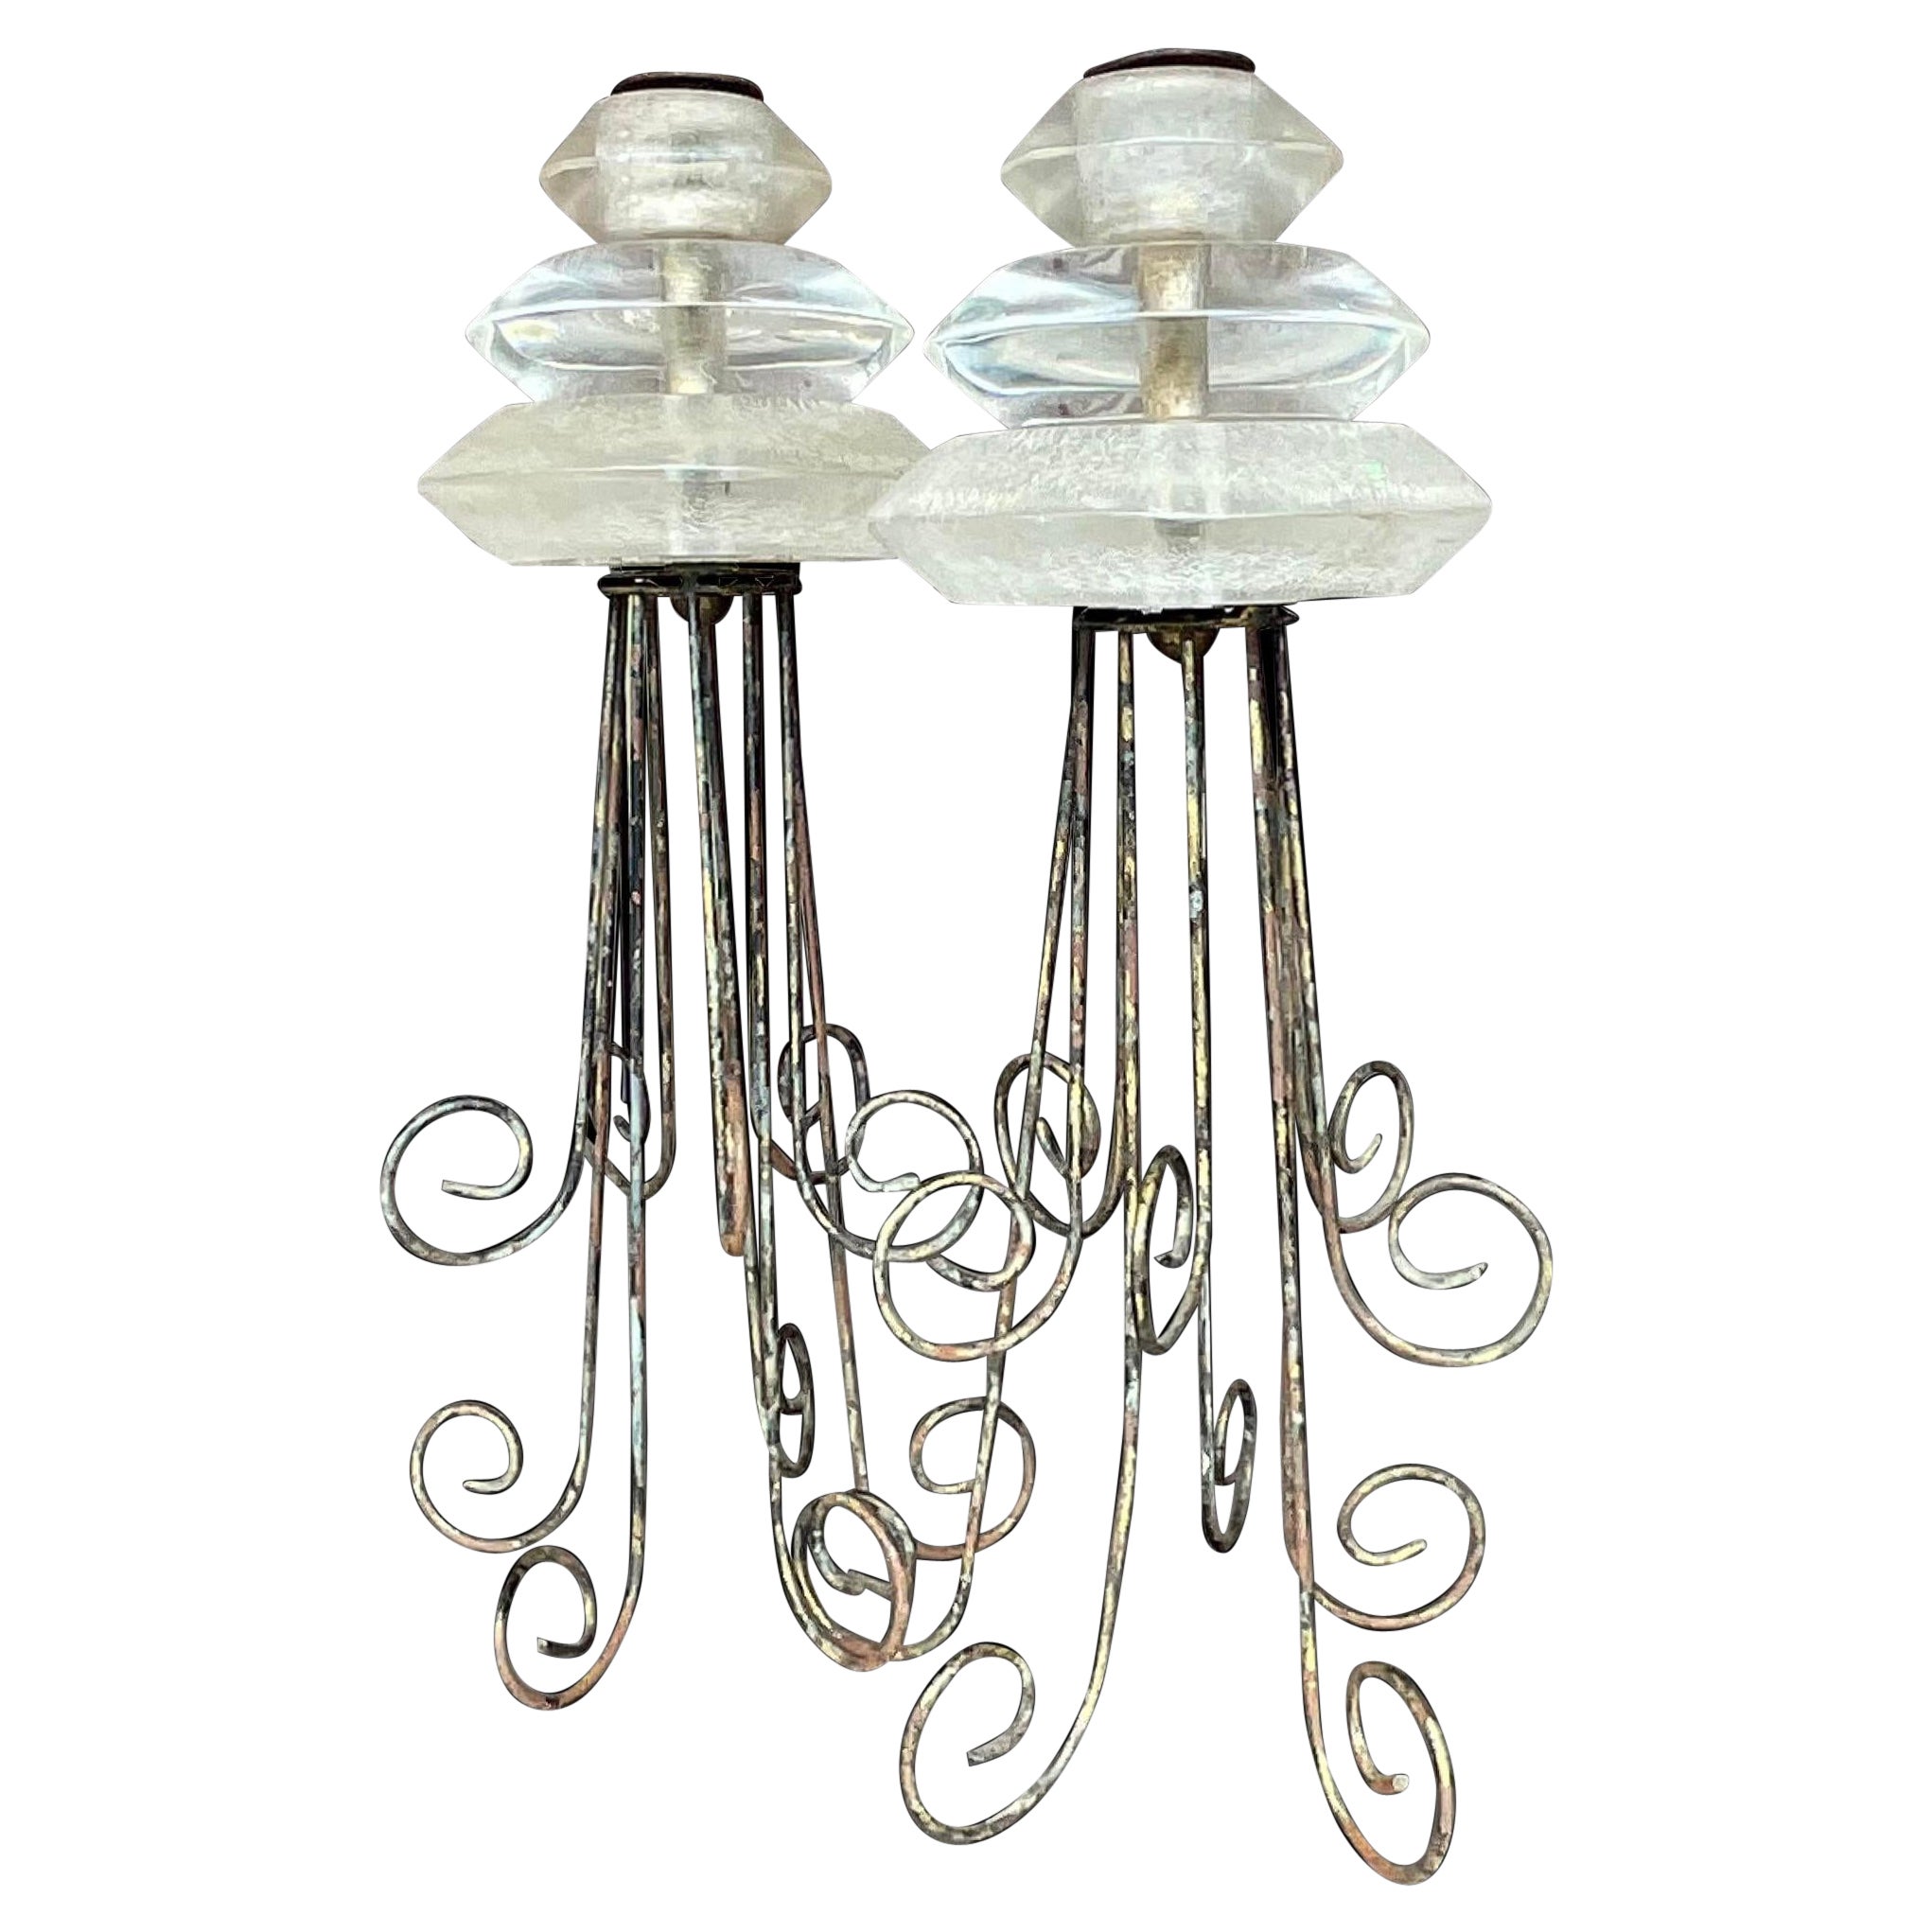 Vintage Boho Lucite and Metal Scroll Candlesticks - Set of 2 For Sale